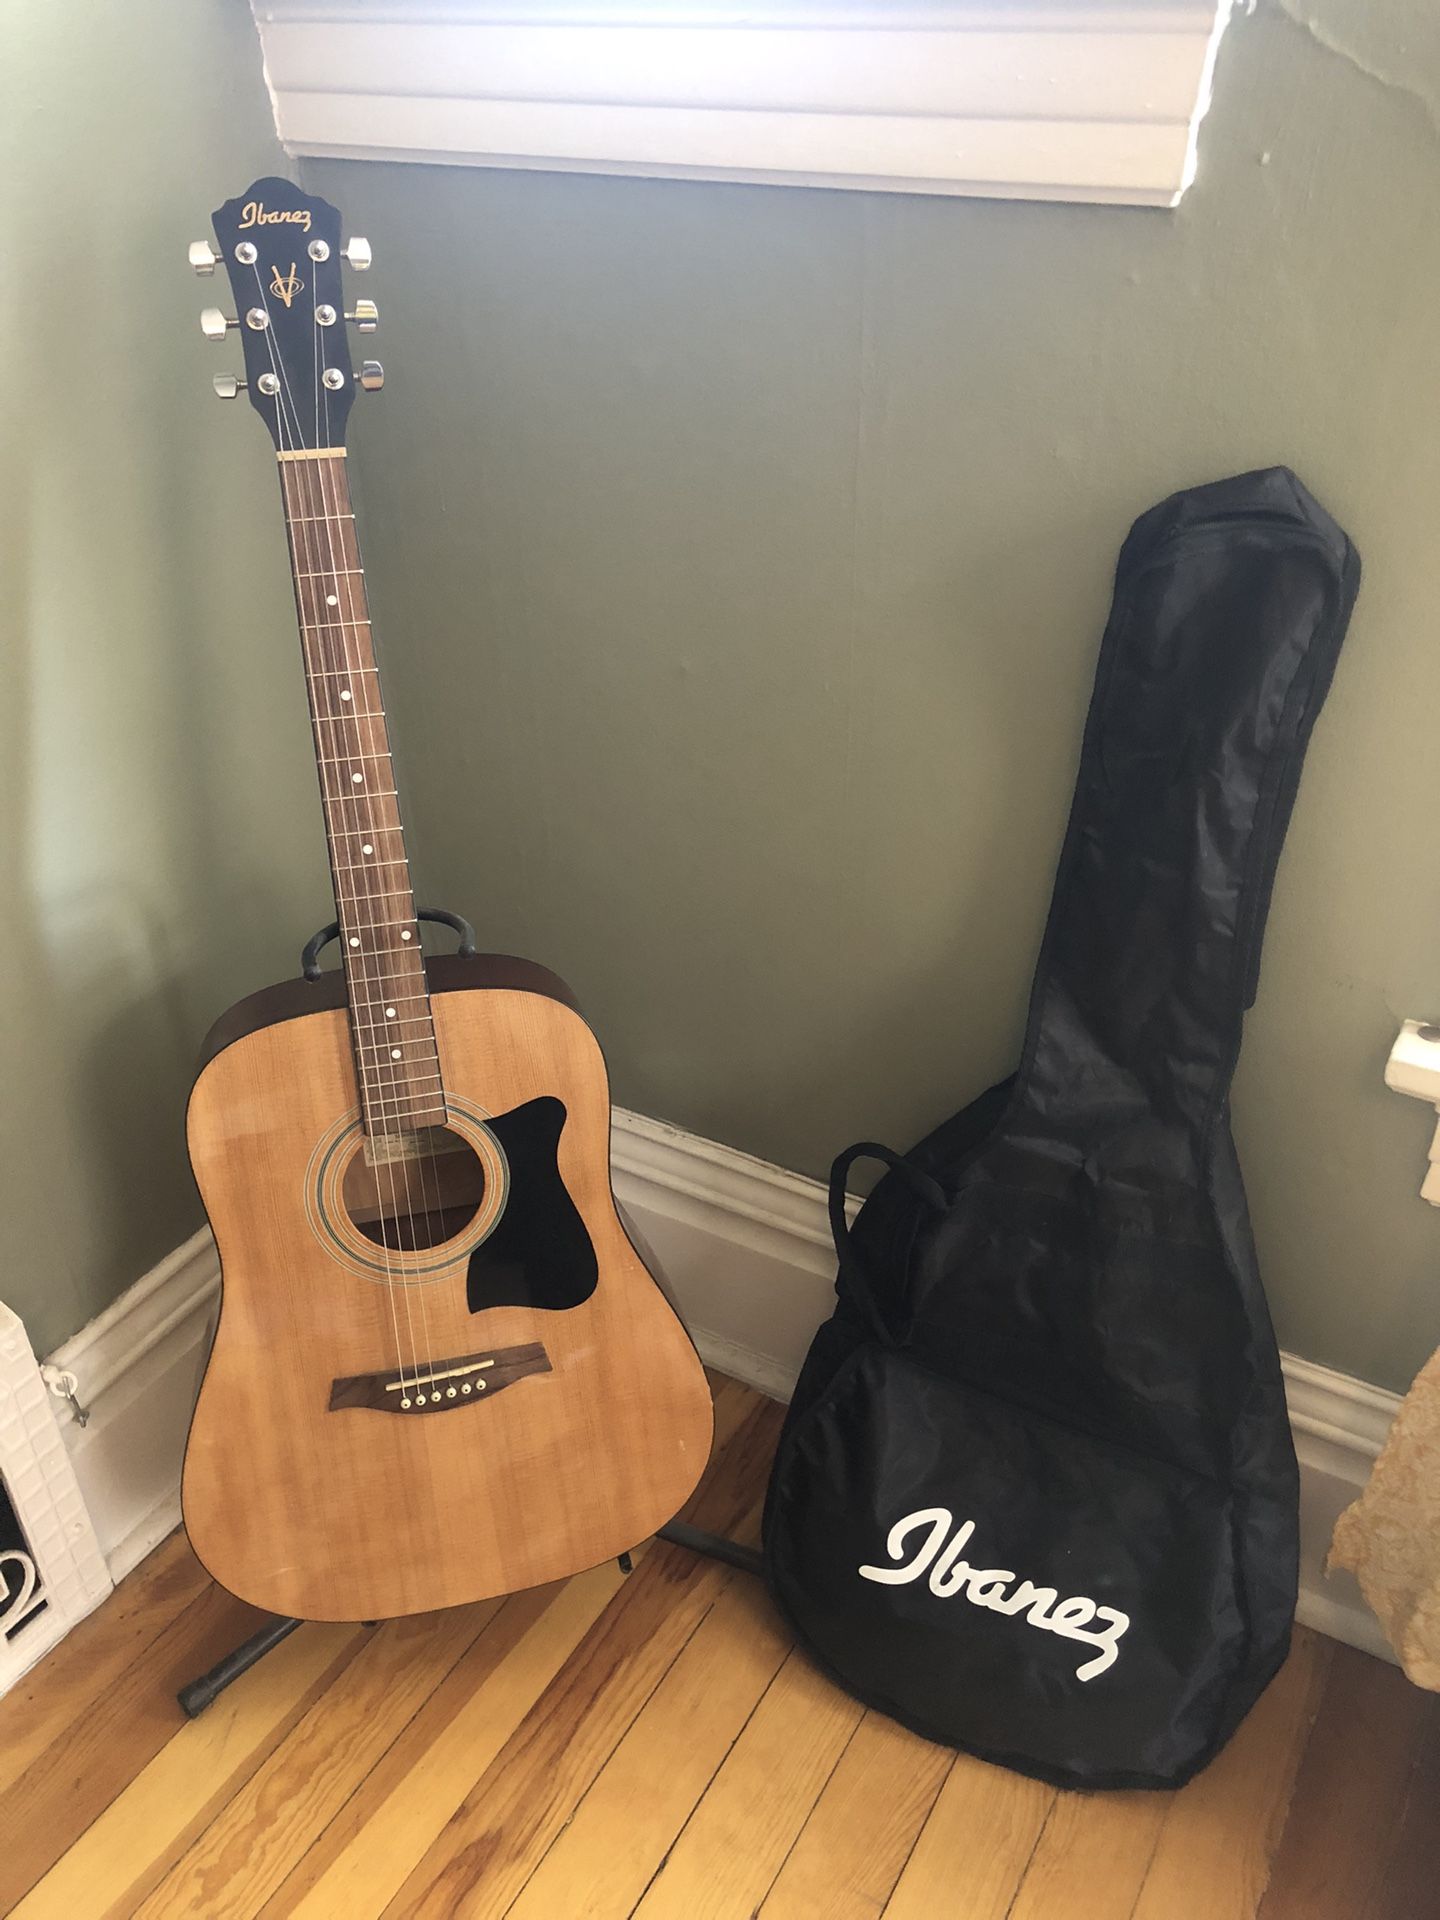 Ibanez Acoustic Guitar, Stand, & Case